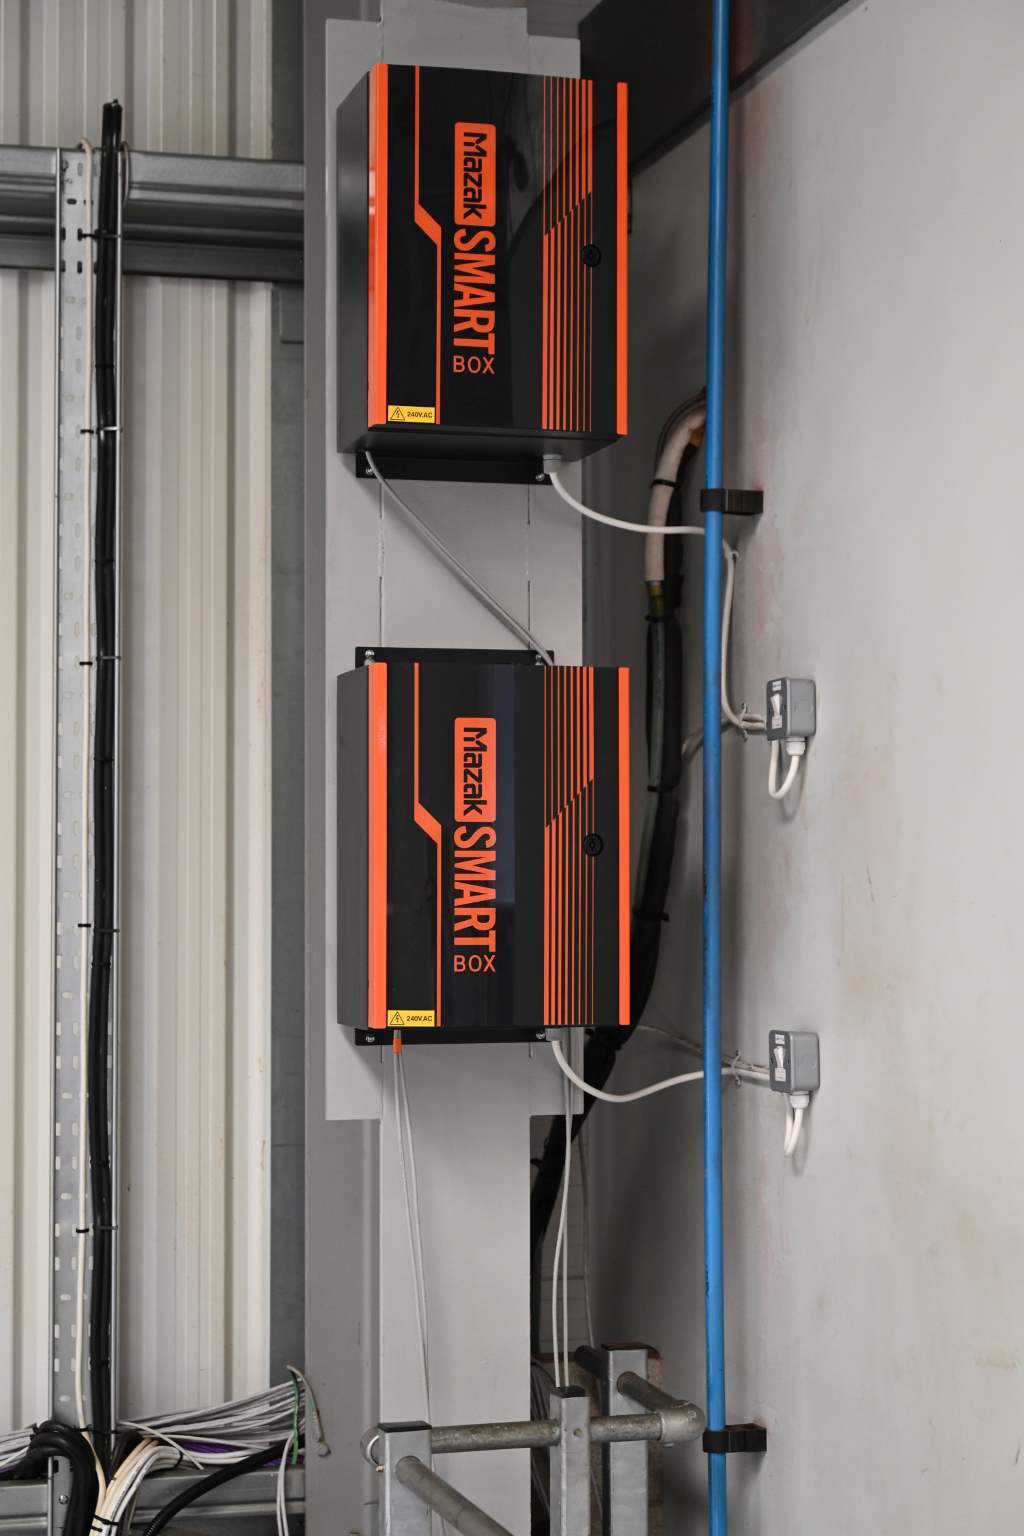 Mazak upgraded Beverston’s network with SMARTBOX technology to ensure high levels of network security